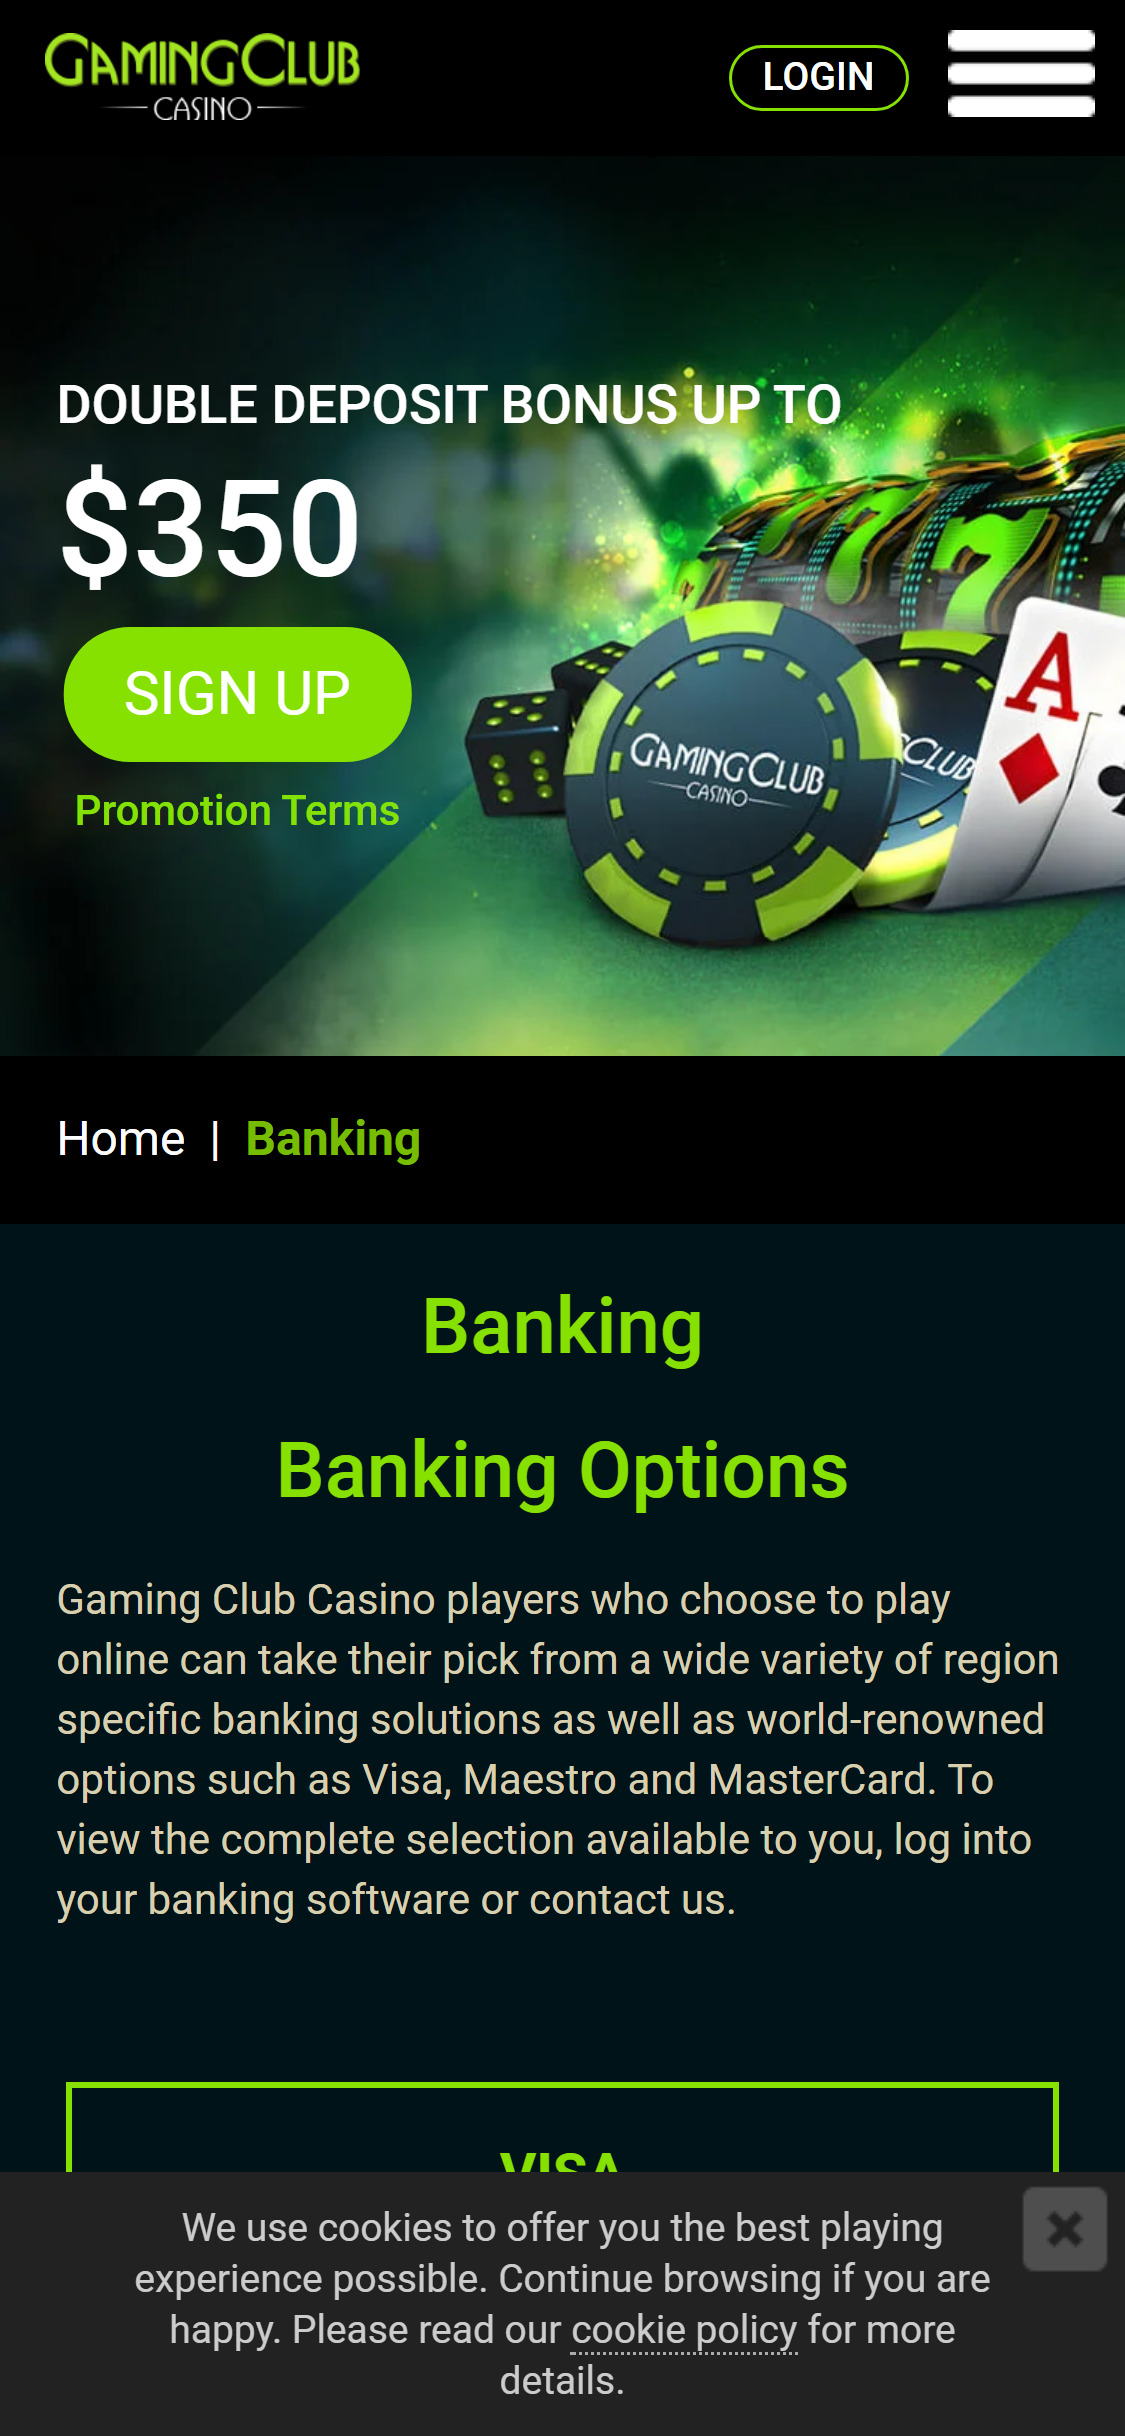 Gaming Club Casino Mobile Payment Methods Review